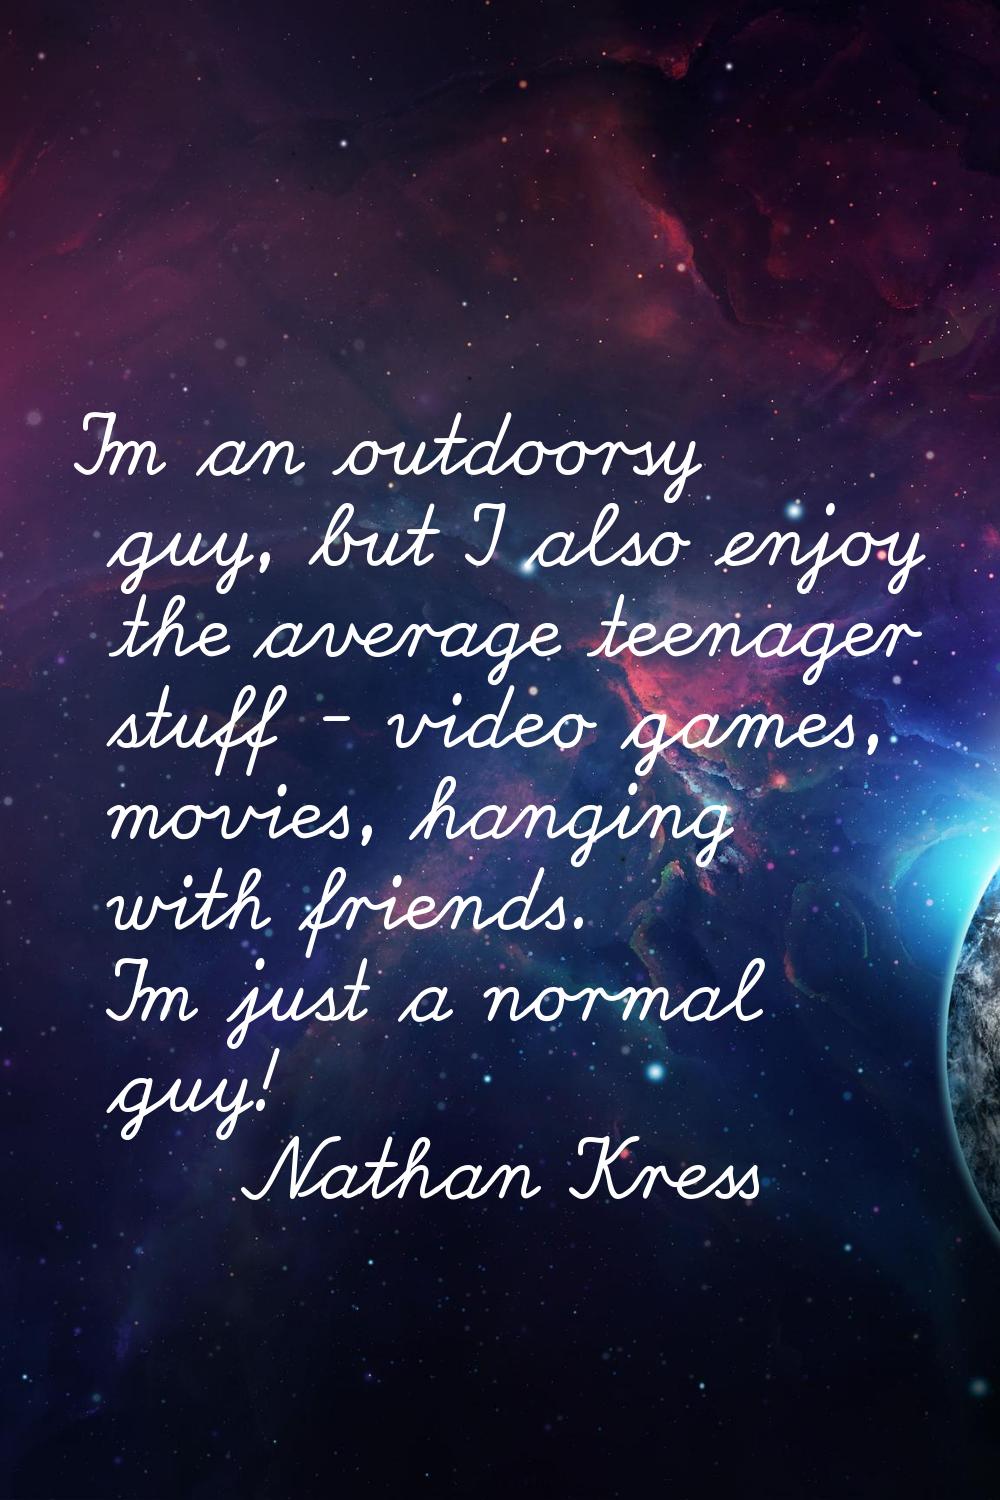 I'm an outdoorsy guy, but I also enjoy the average teenager stuff - video games, movies, hanging wi